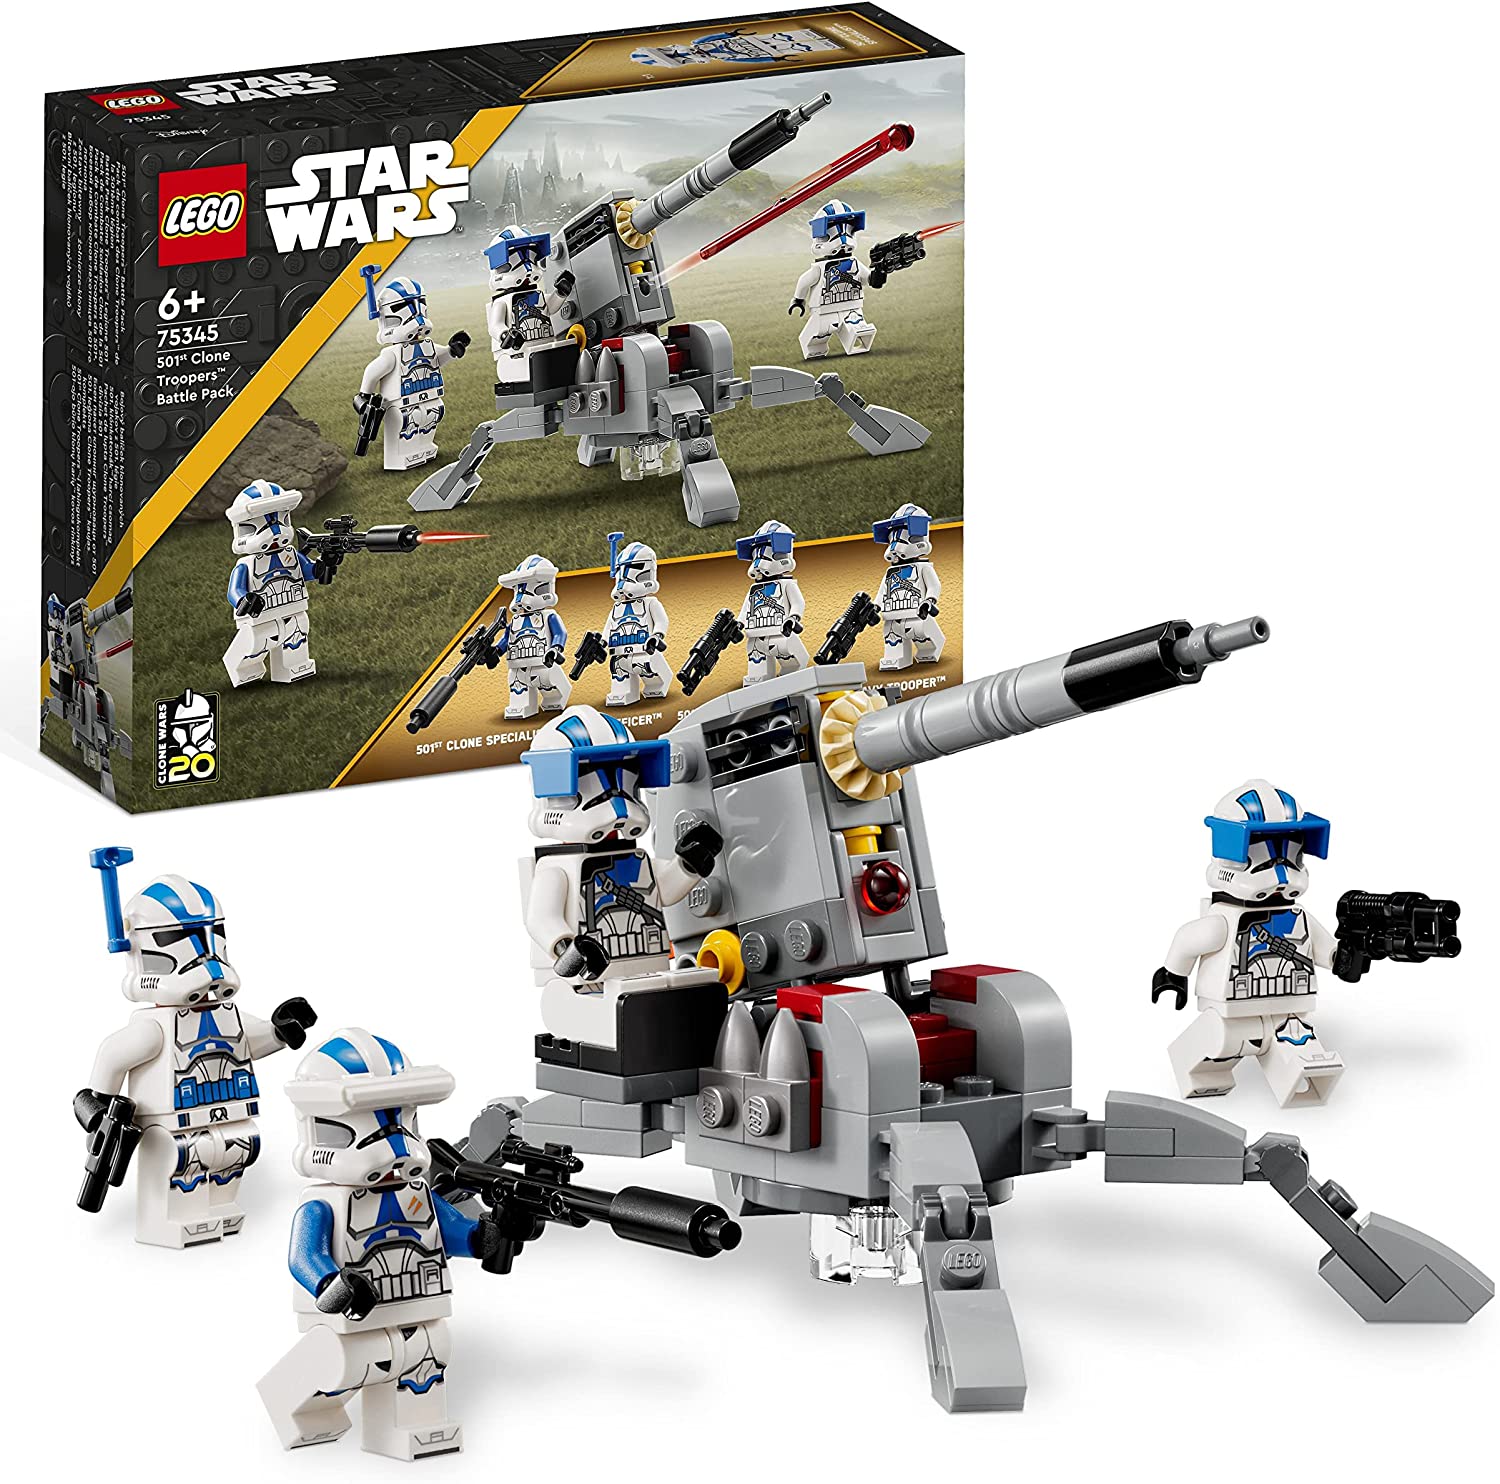 LEGO 75345 Star Wars 501st Clone Troopers Battle Pack Set With Vehicles and 4 Figures, Buildable Toy With Av-7 Anti-Vehicle Cannon and Spring Loaded Shooter